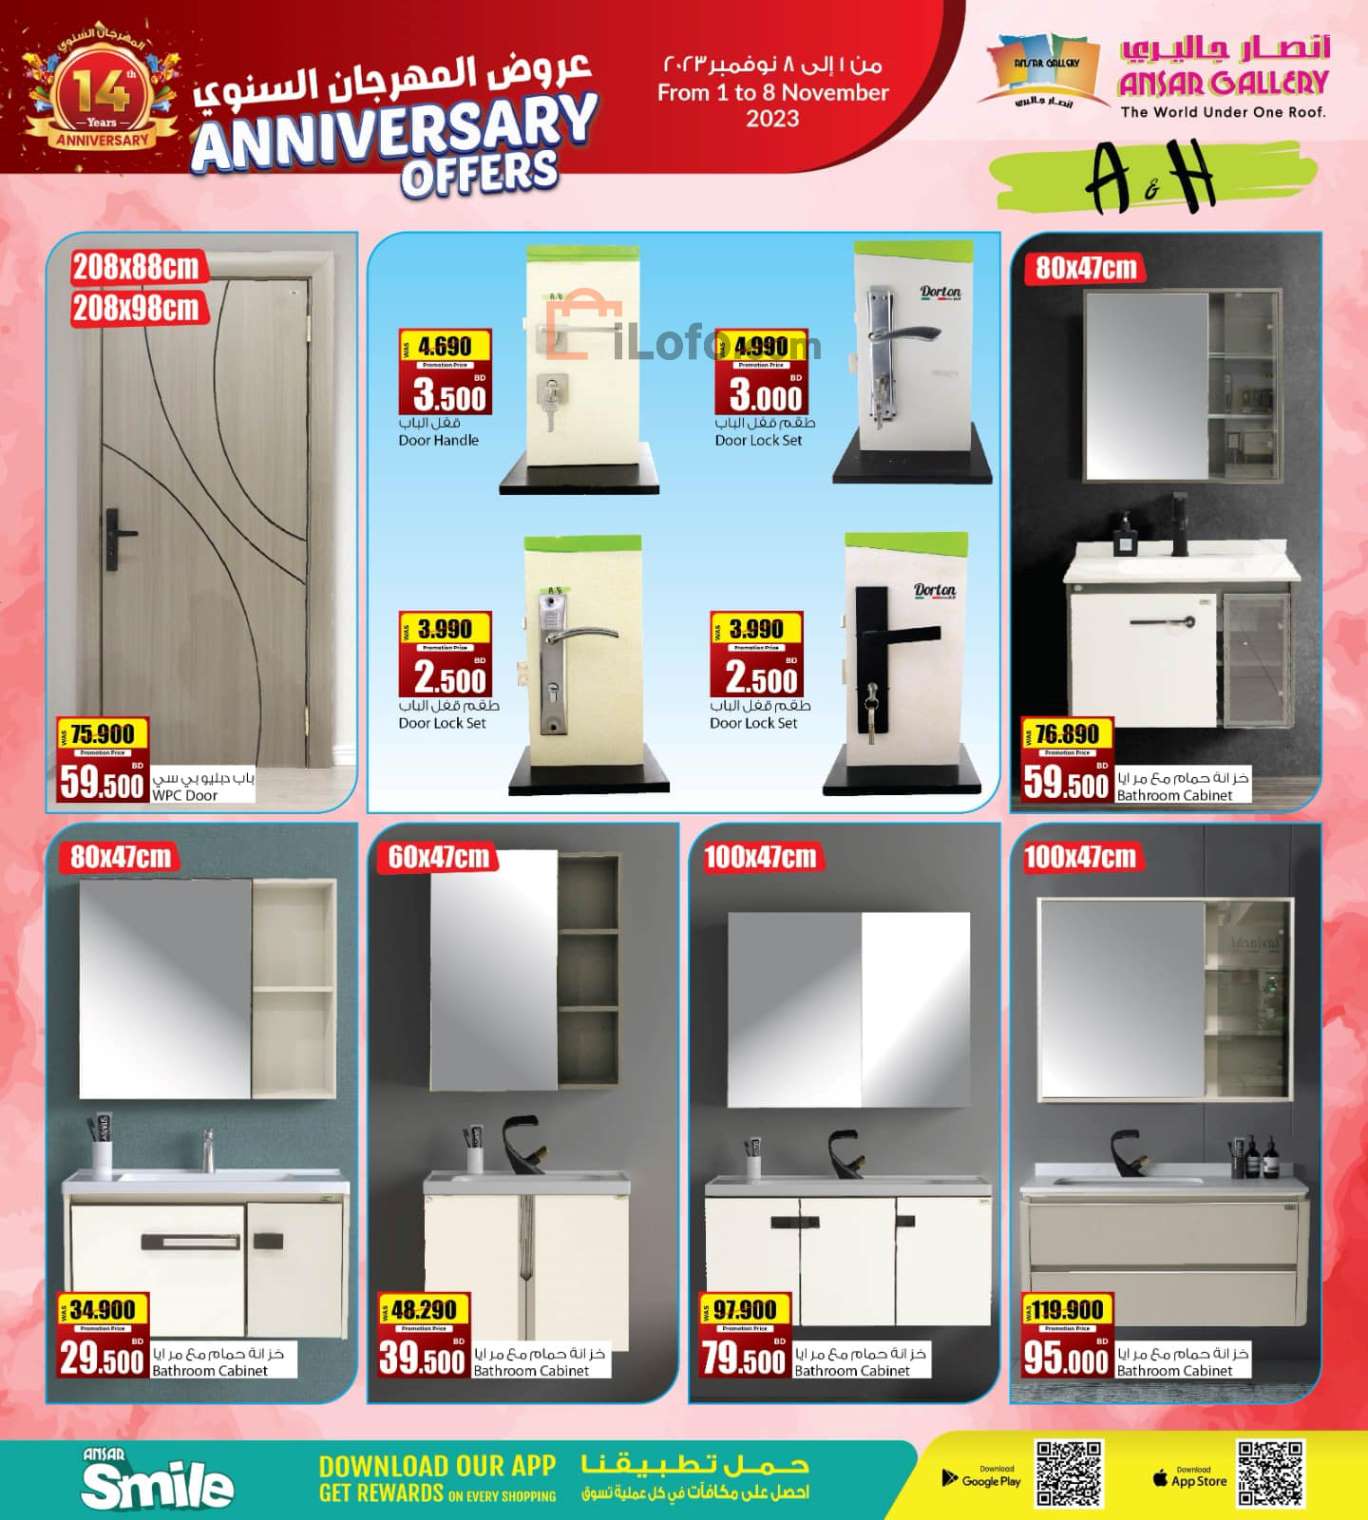 Page 4 at Anniversary Offers at Ansar Gallery Bahrain